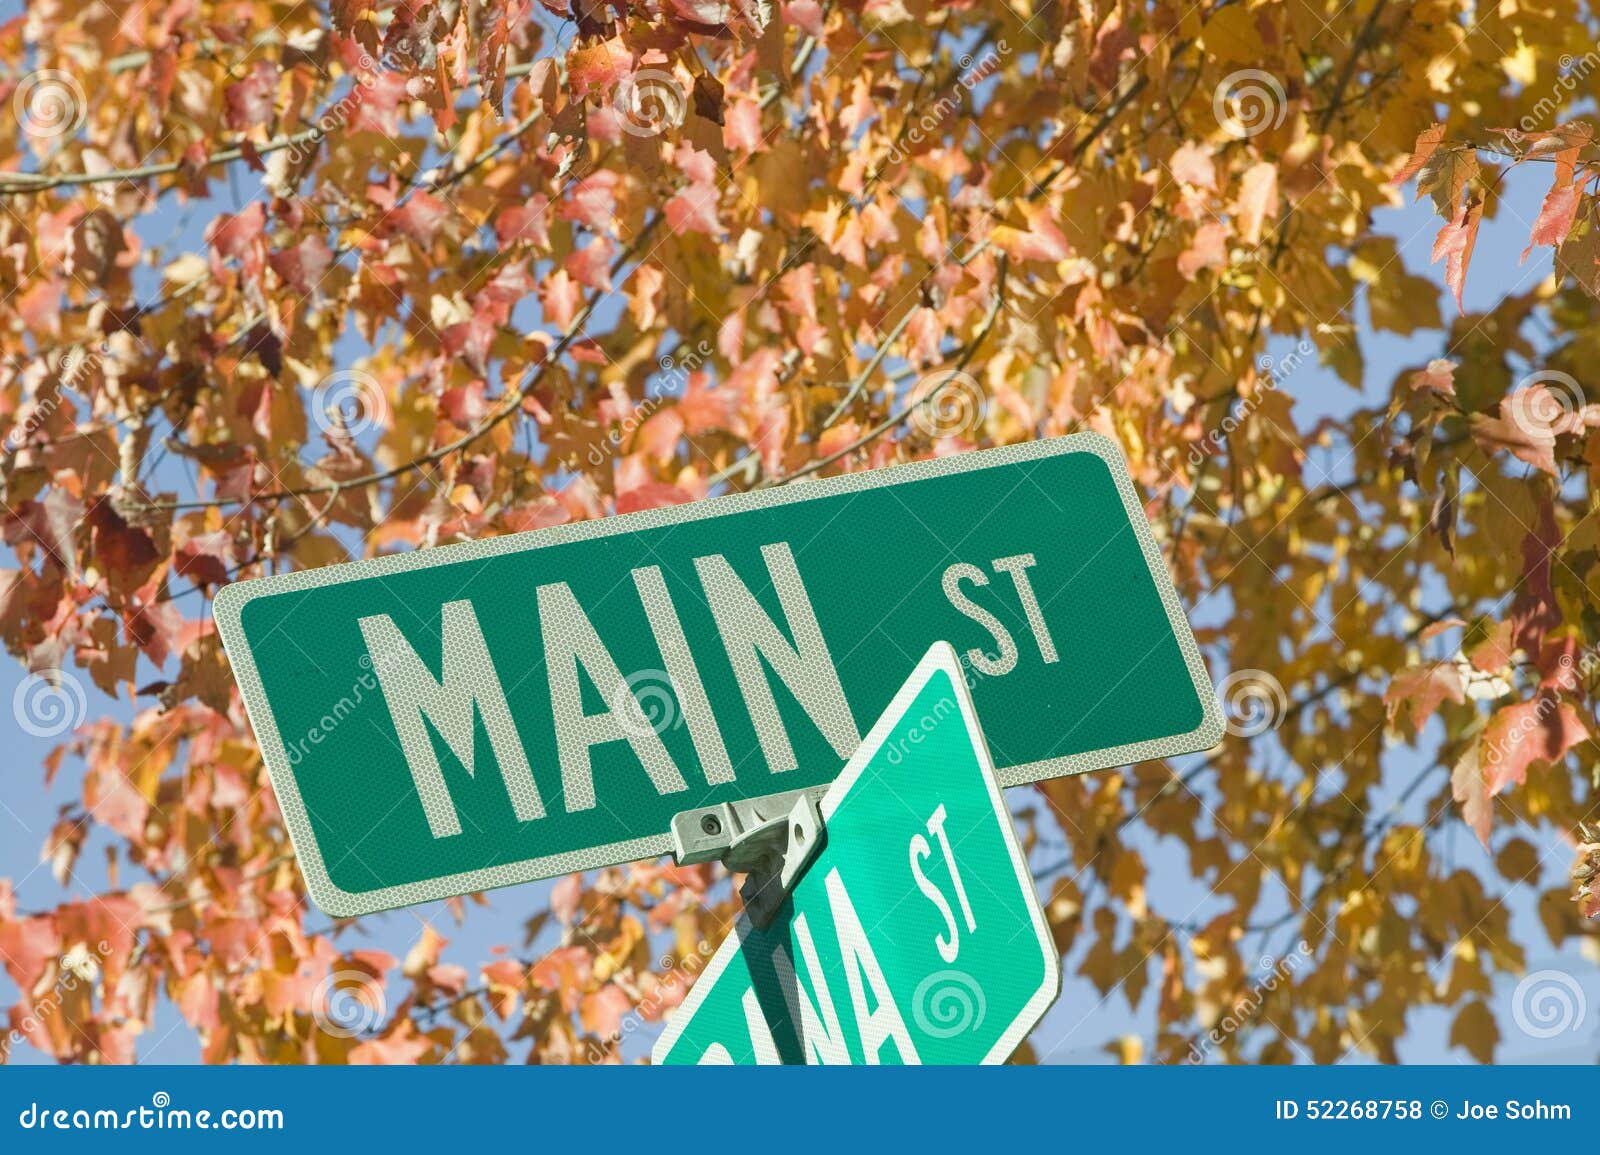 main street usa and autumn leaves, new hampshire, new england